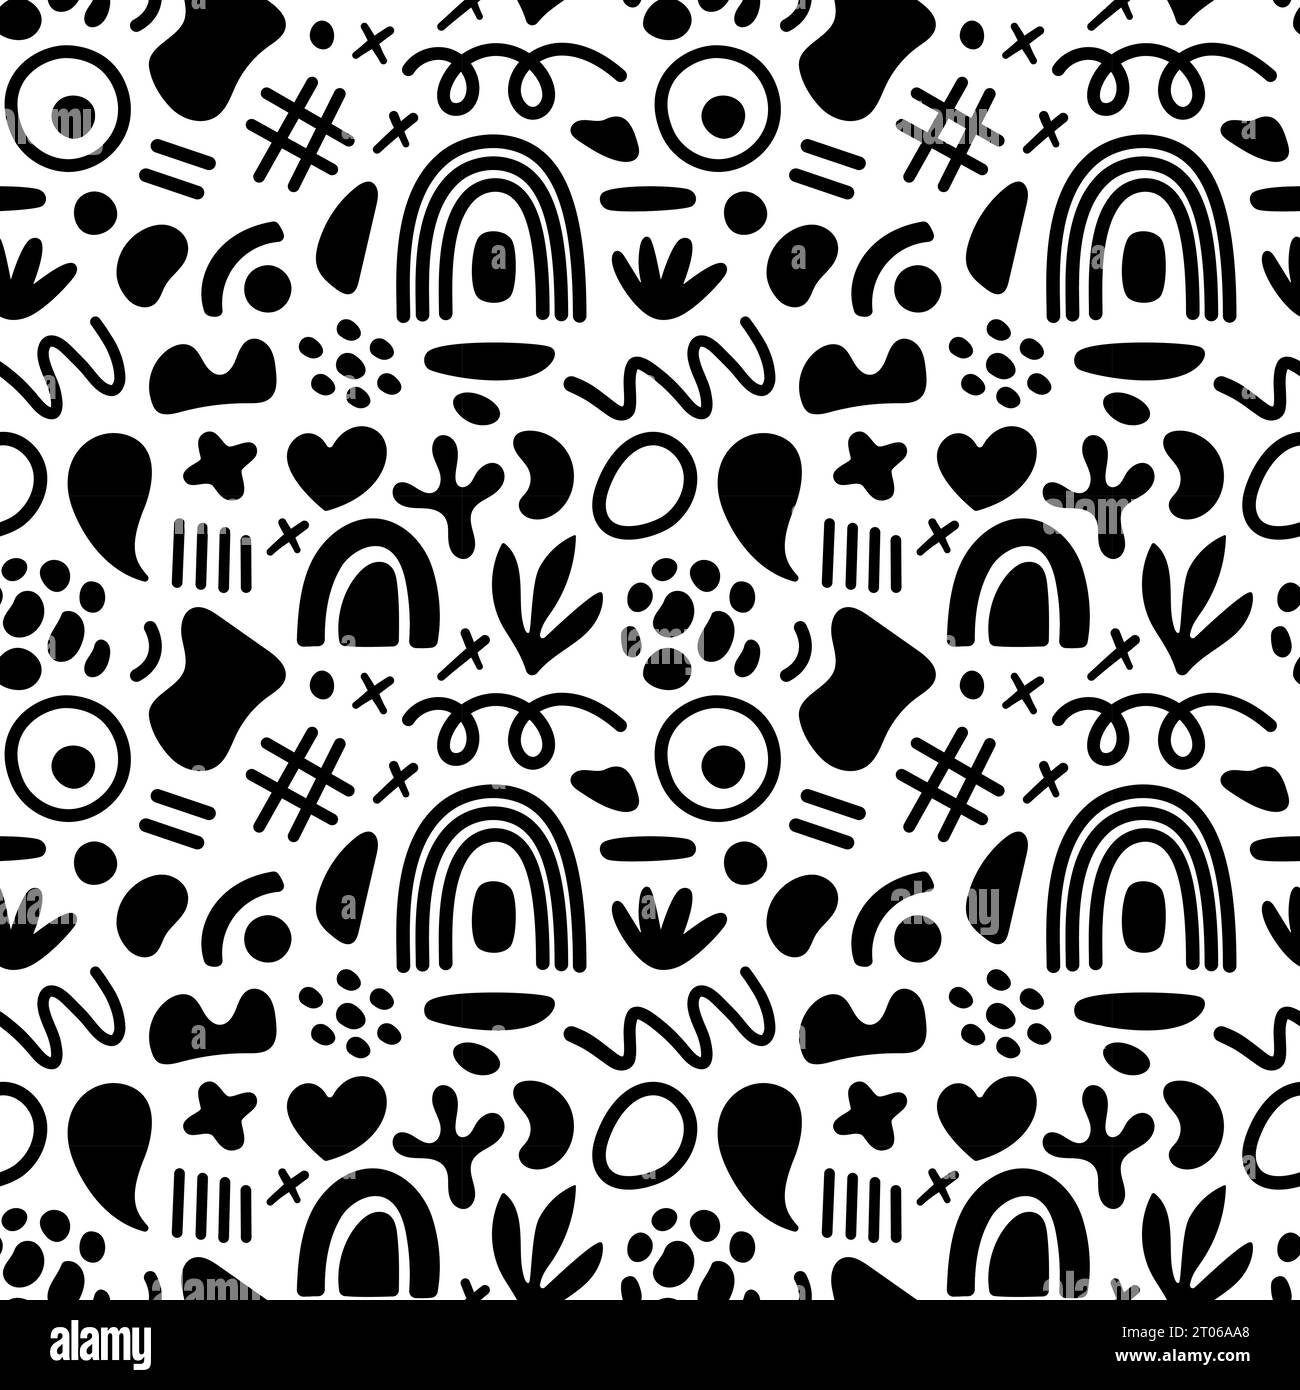 Abstract geometric shapes seamless pattern. Vector Hand drawn various shapes and doodle objects. Abstract contemporary modern style. Trendy black and Stock Vector